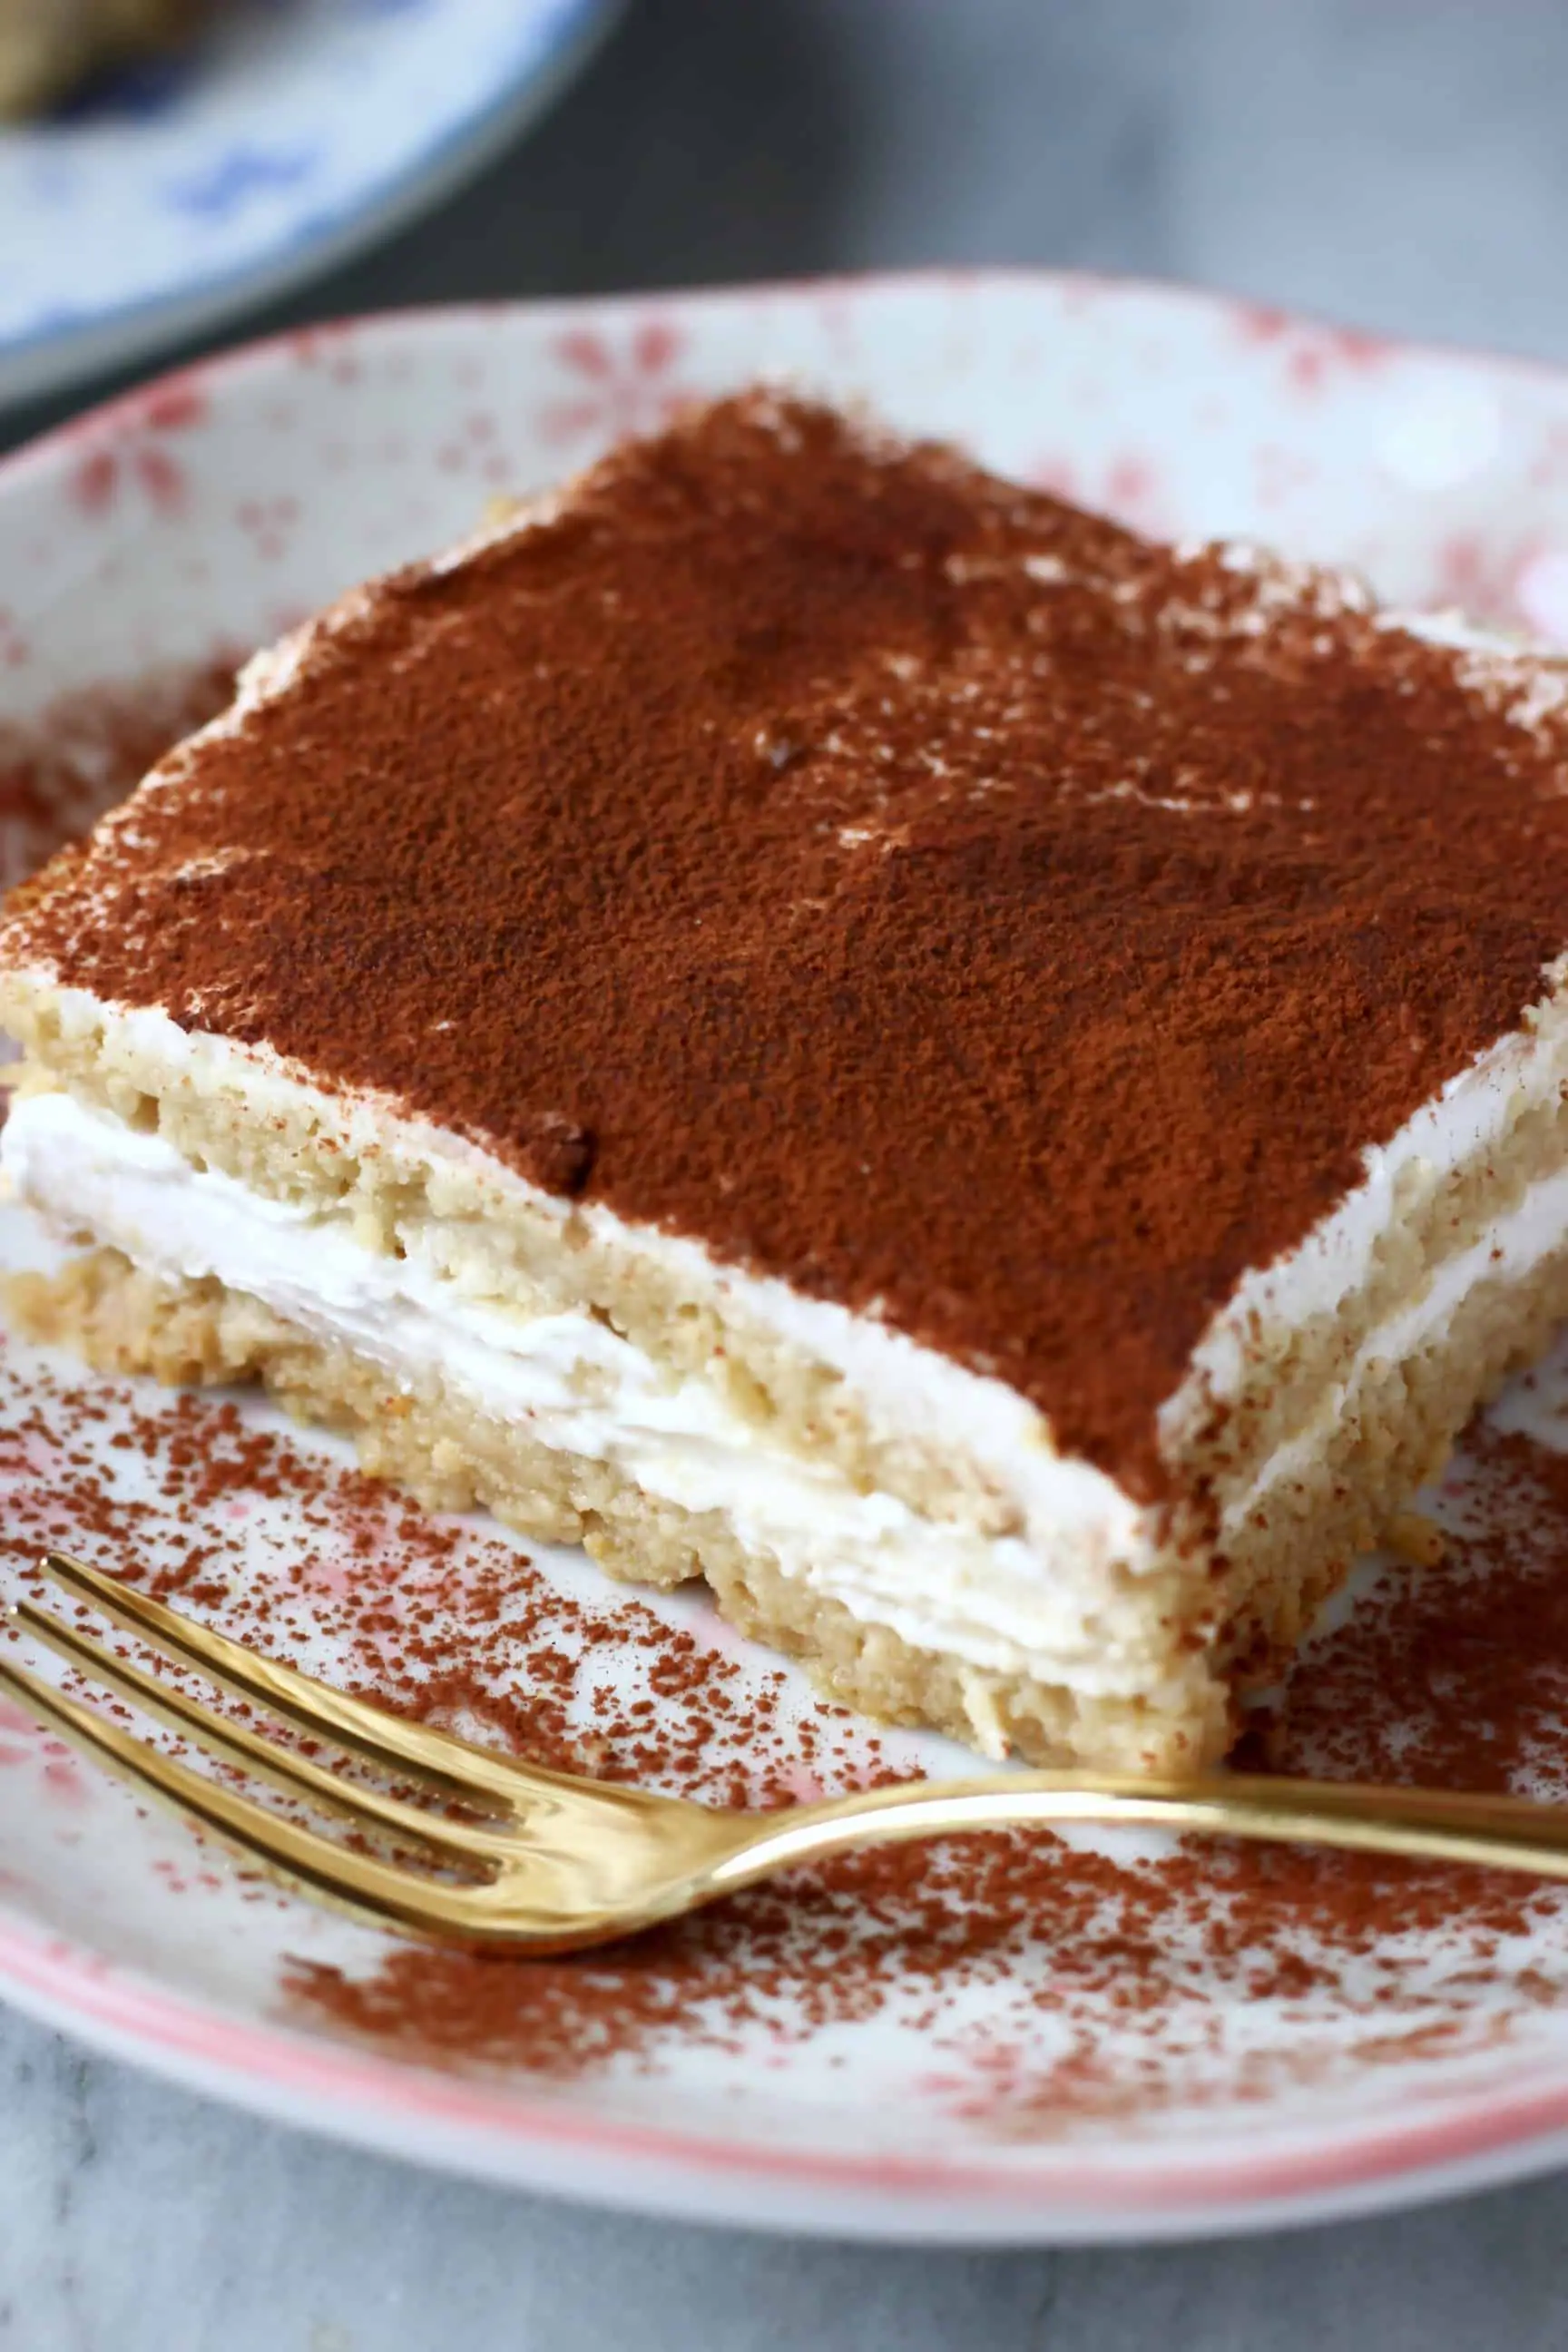 A square of gluten-free vegan tiramisu with a bite taken out of it on a white plate with pink flowers and a gold fork